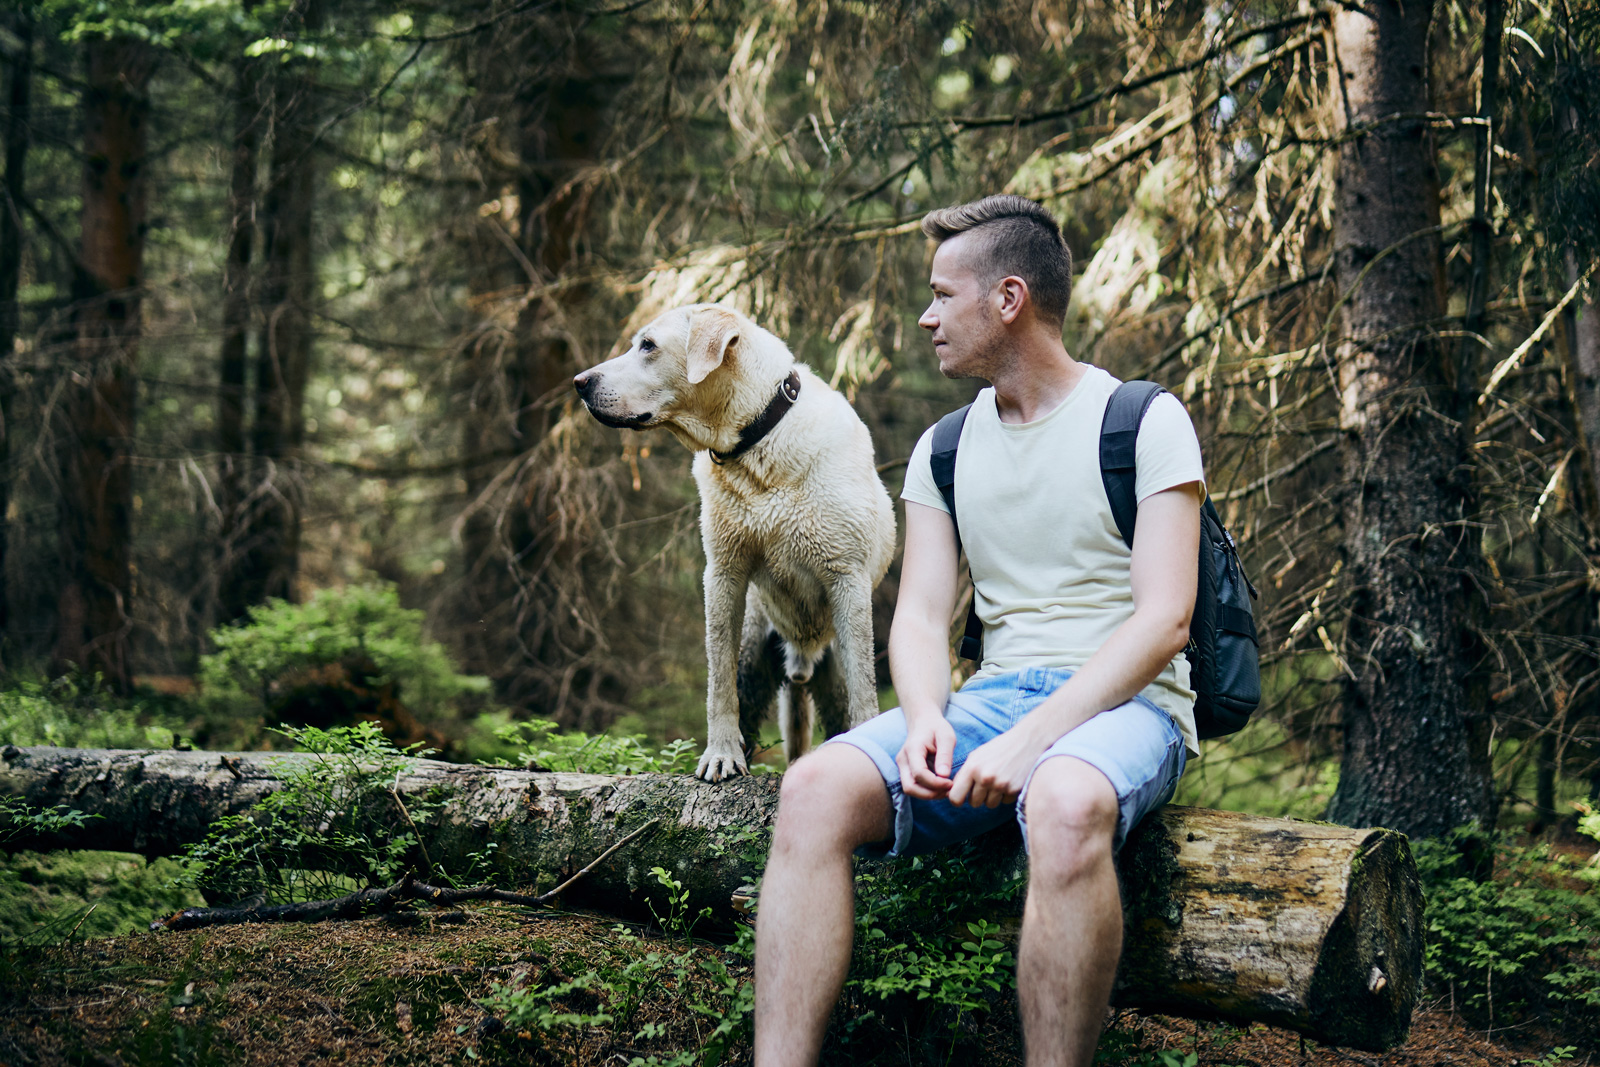 tourist-with-dog-in-forest-2022-02-08-22-39-31-utc.jpg